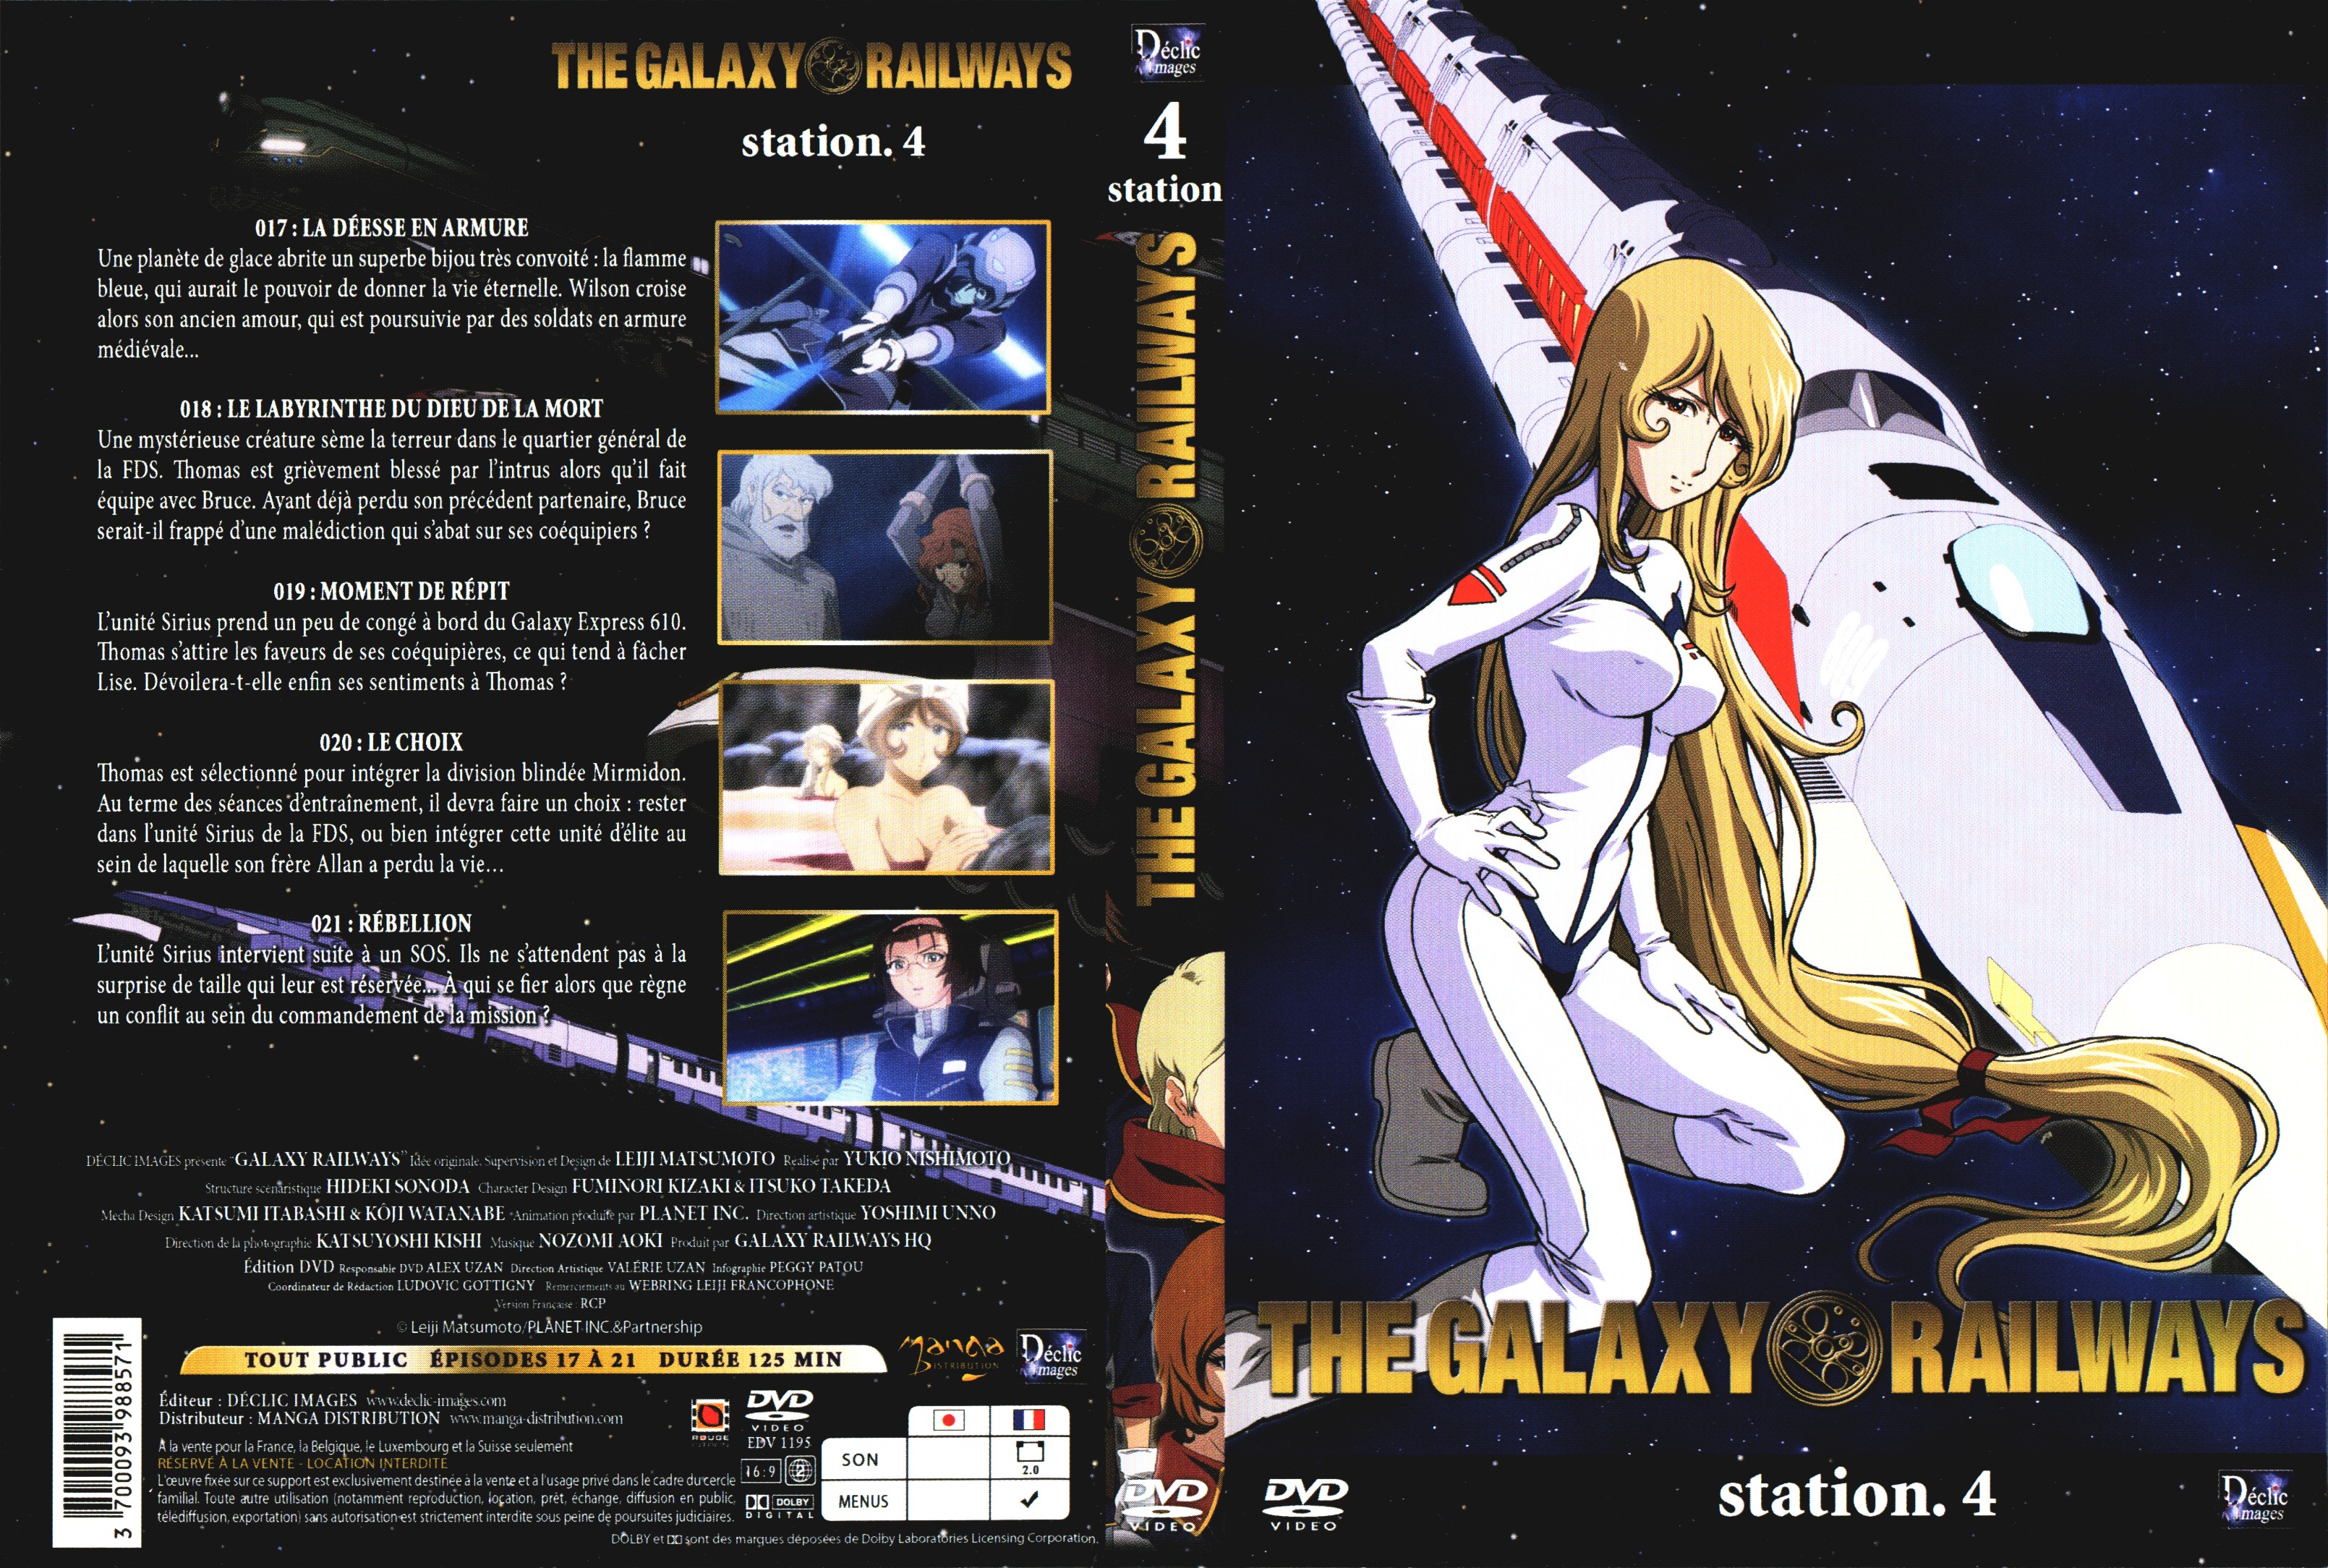 Jaquette DVD The galaxy railways station 4